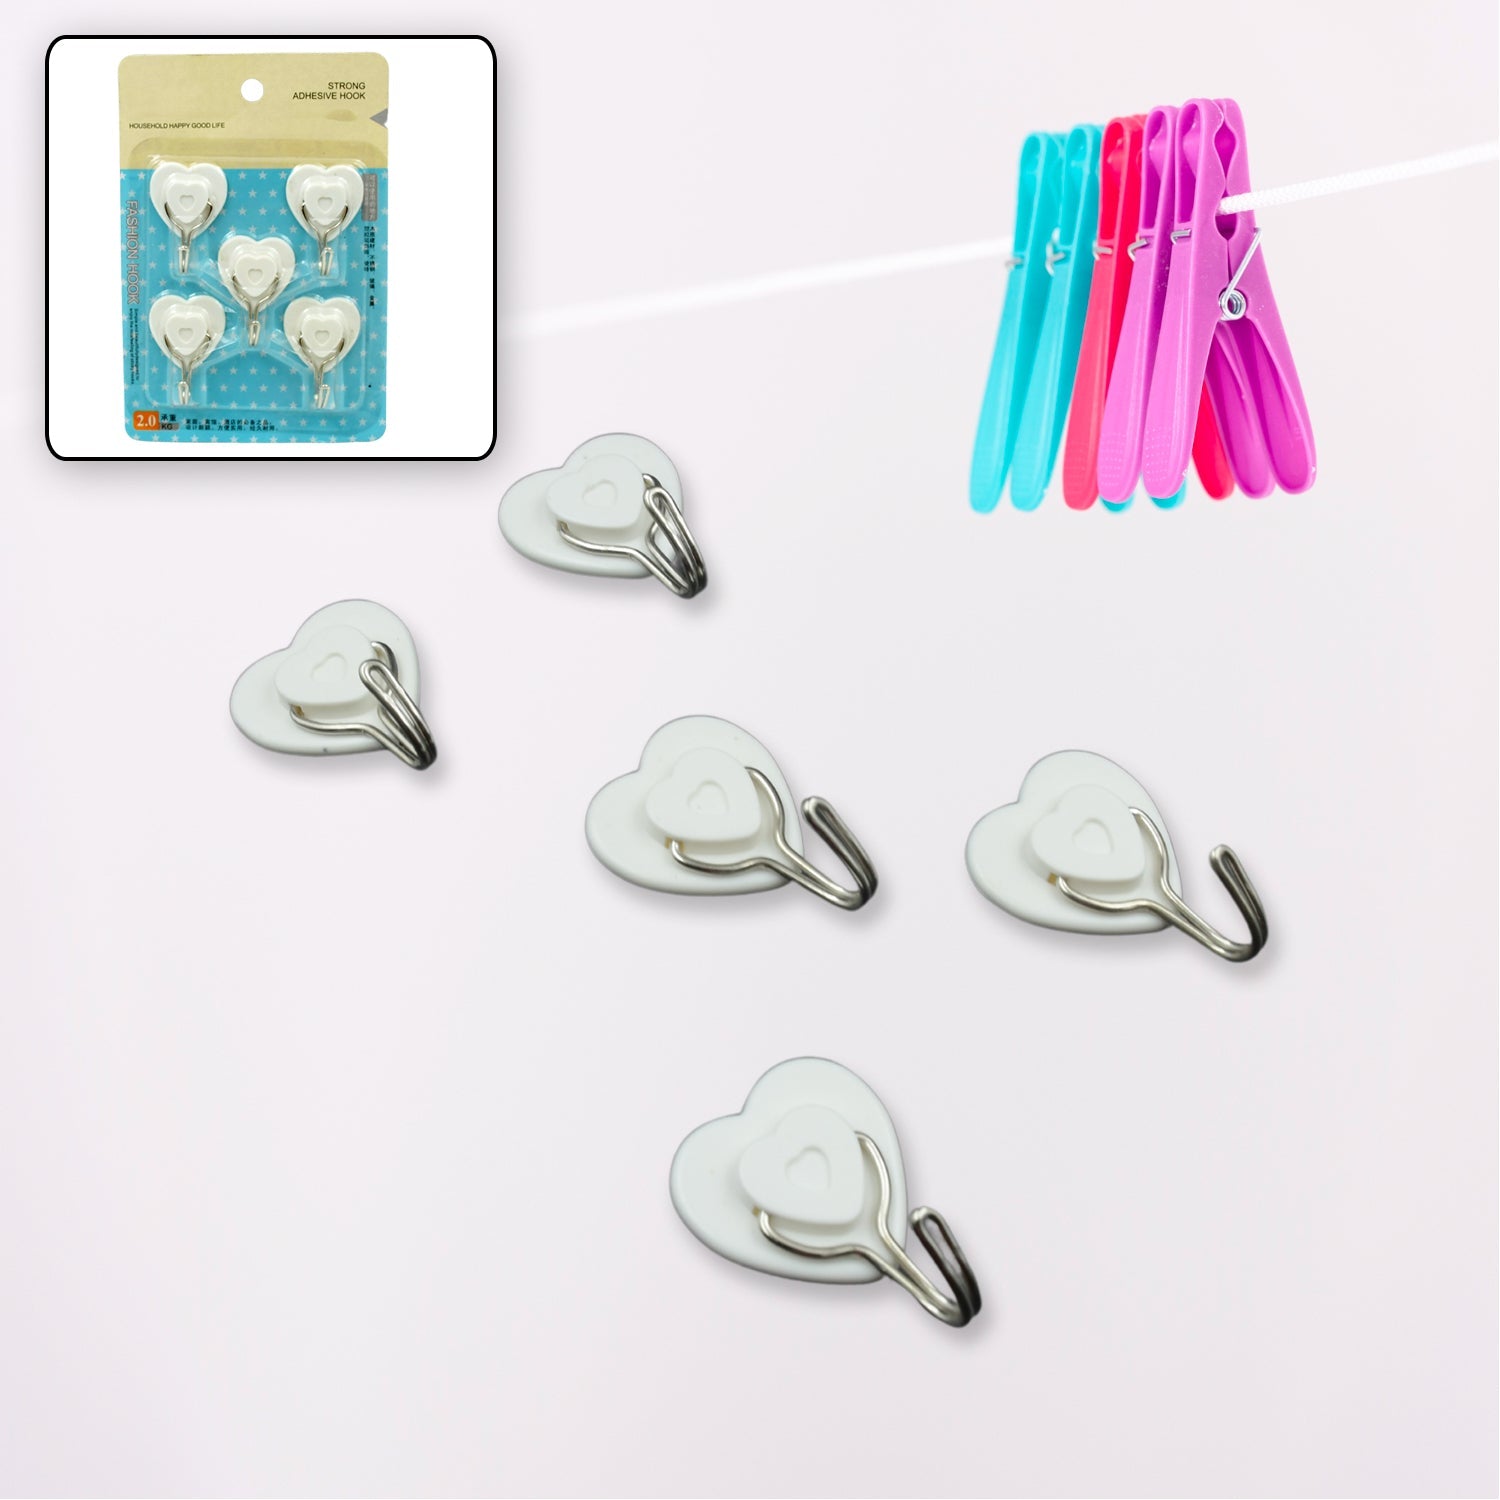 8779 Multipurpose Strong Hook Self-Adhesive hooks for wall Heavy Plastic Hook, Sticky Hook Household For Home , Decorative Hooks, Bathroom & All Type Wall Use Hook , Suitable for Bathroom, Kitchen, Office (5 Pc Set)